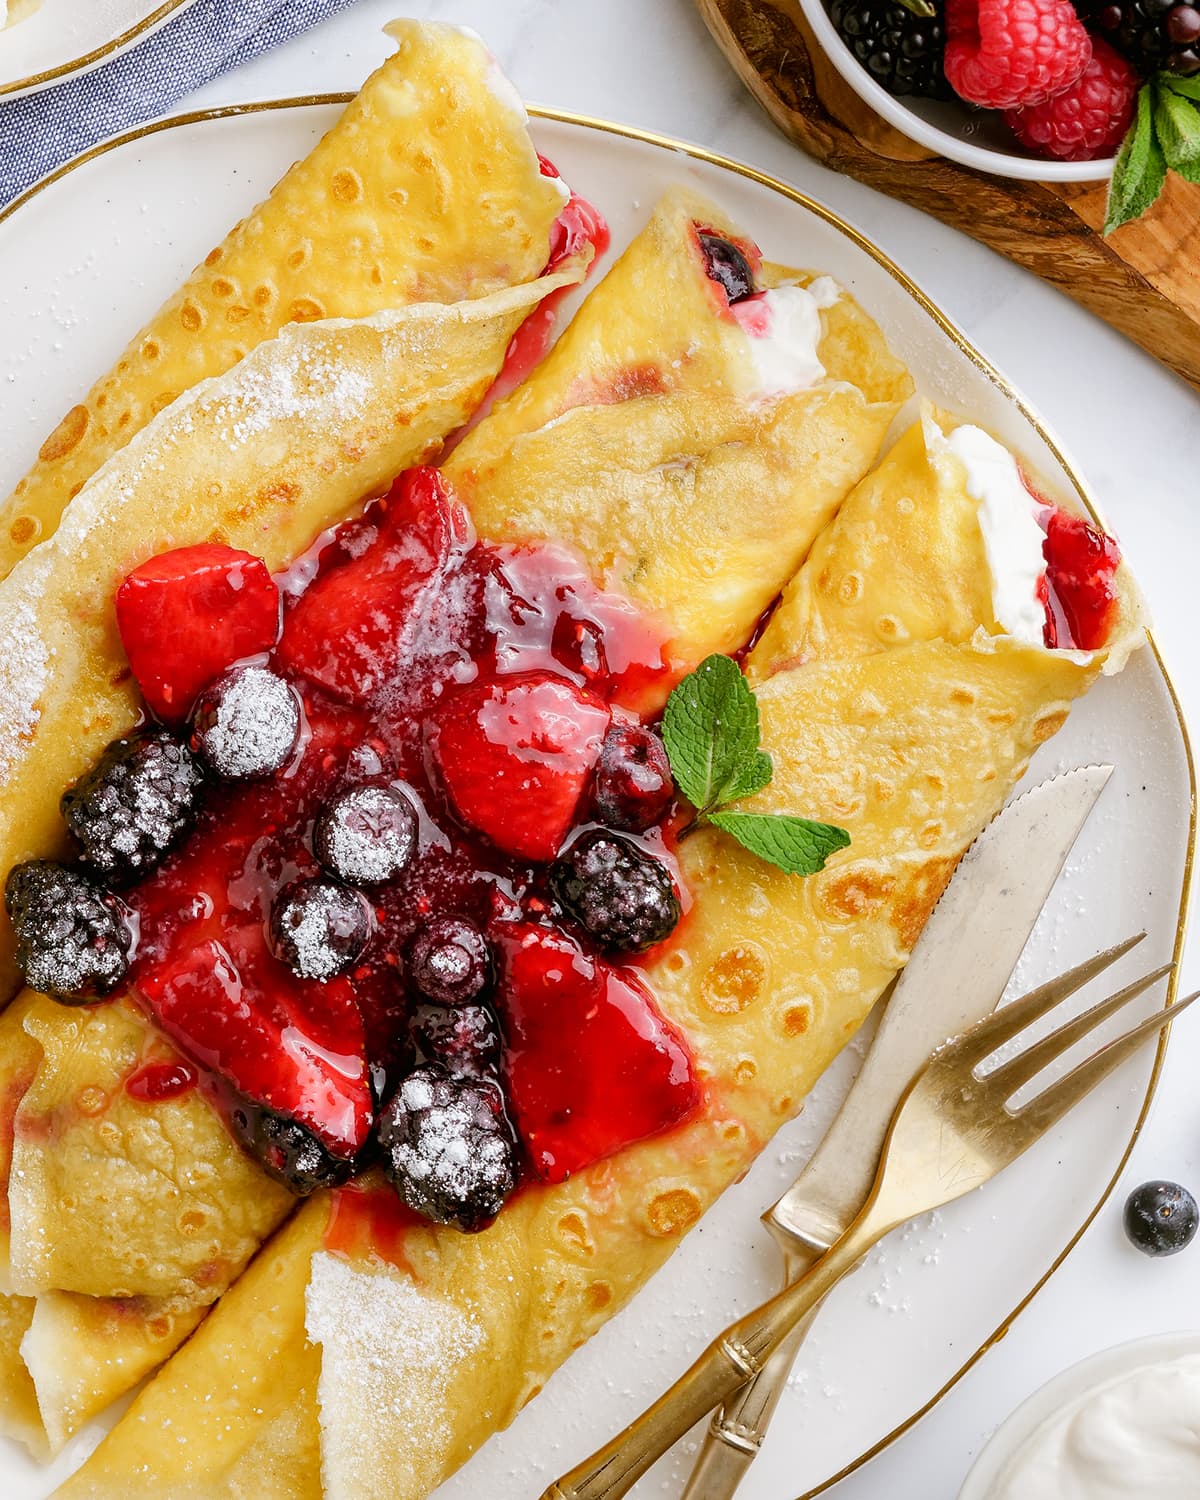 A plate of three rolled crepes topped with berries, and sauce on a plate.